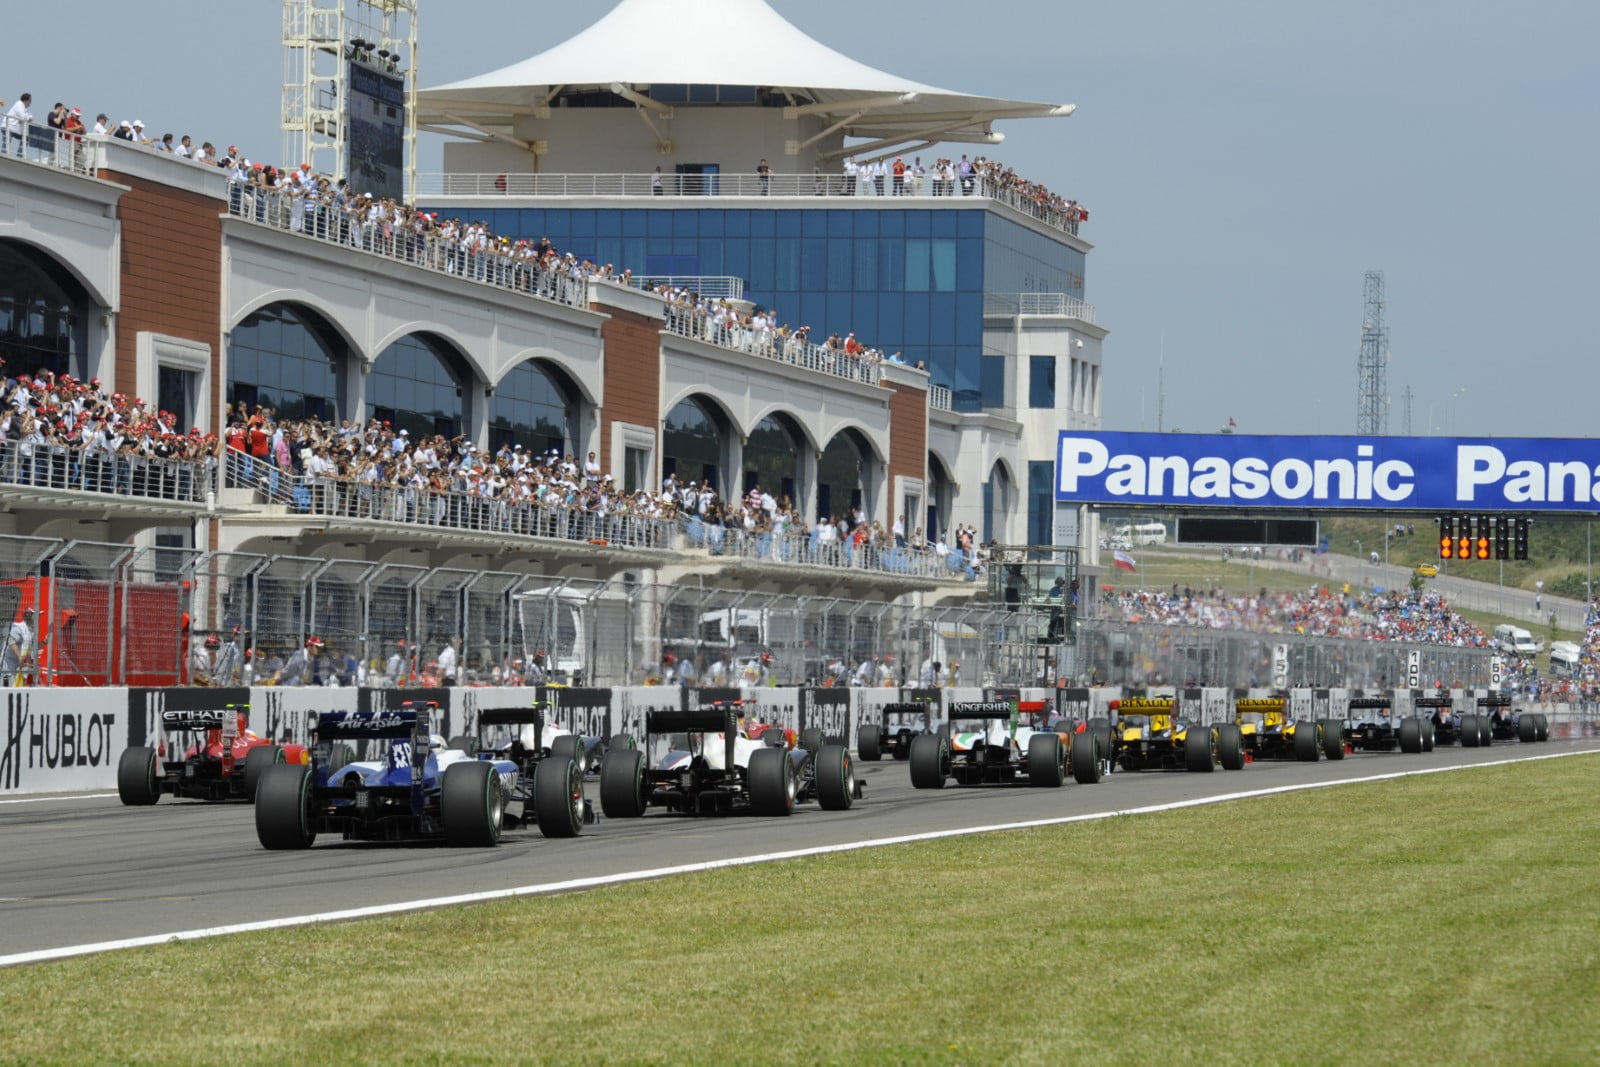 Reprieve for F1 fans as Turkish GP organisers hope to accomodate 100,000 fans